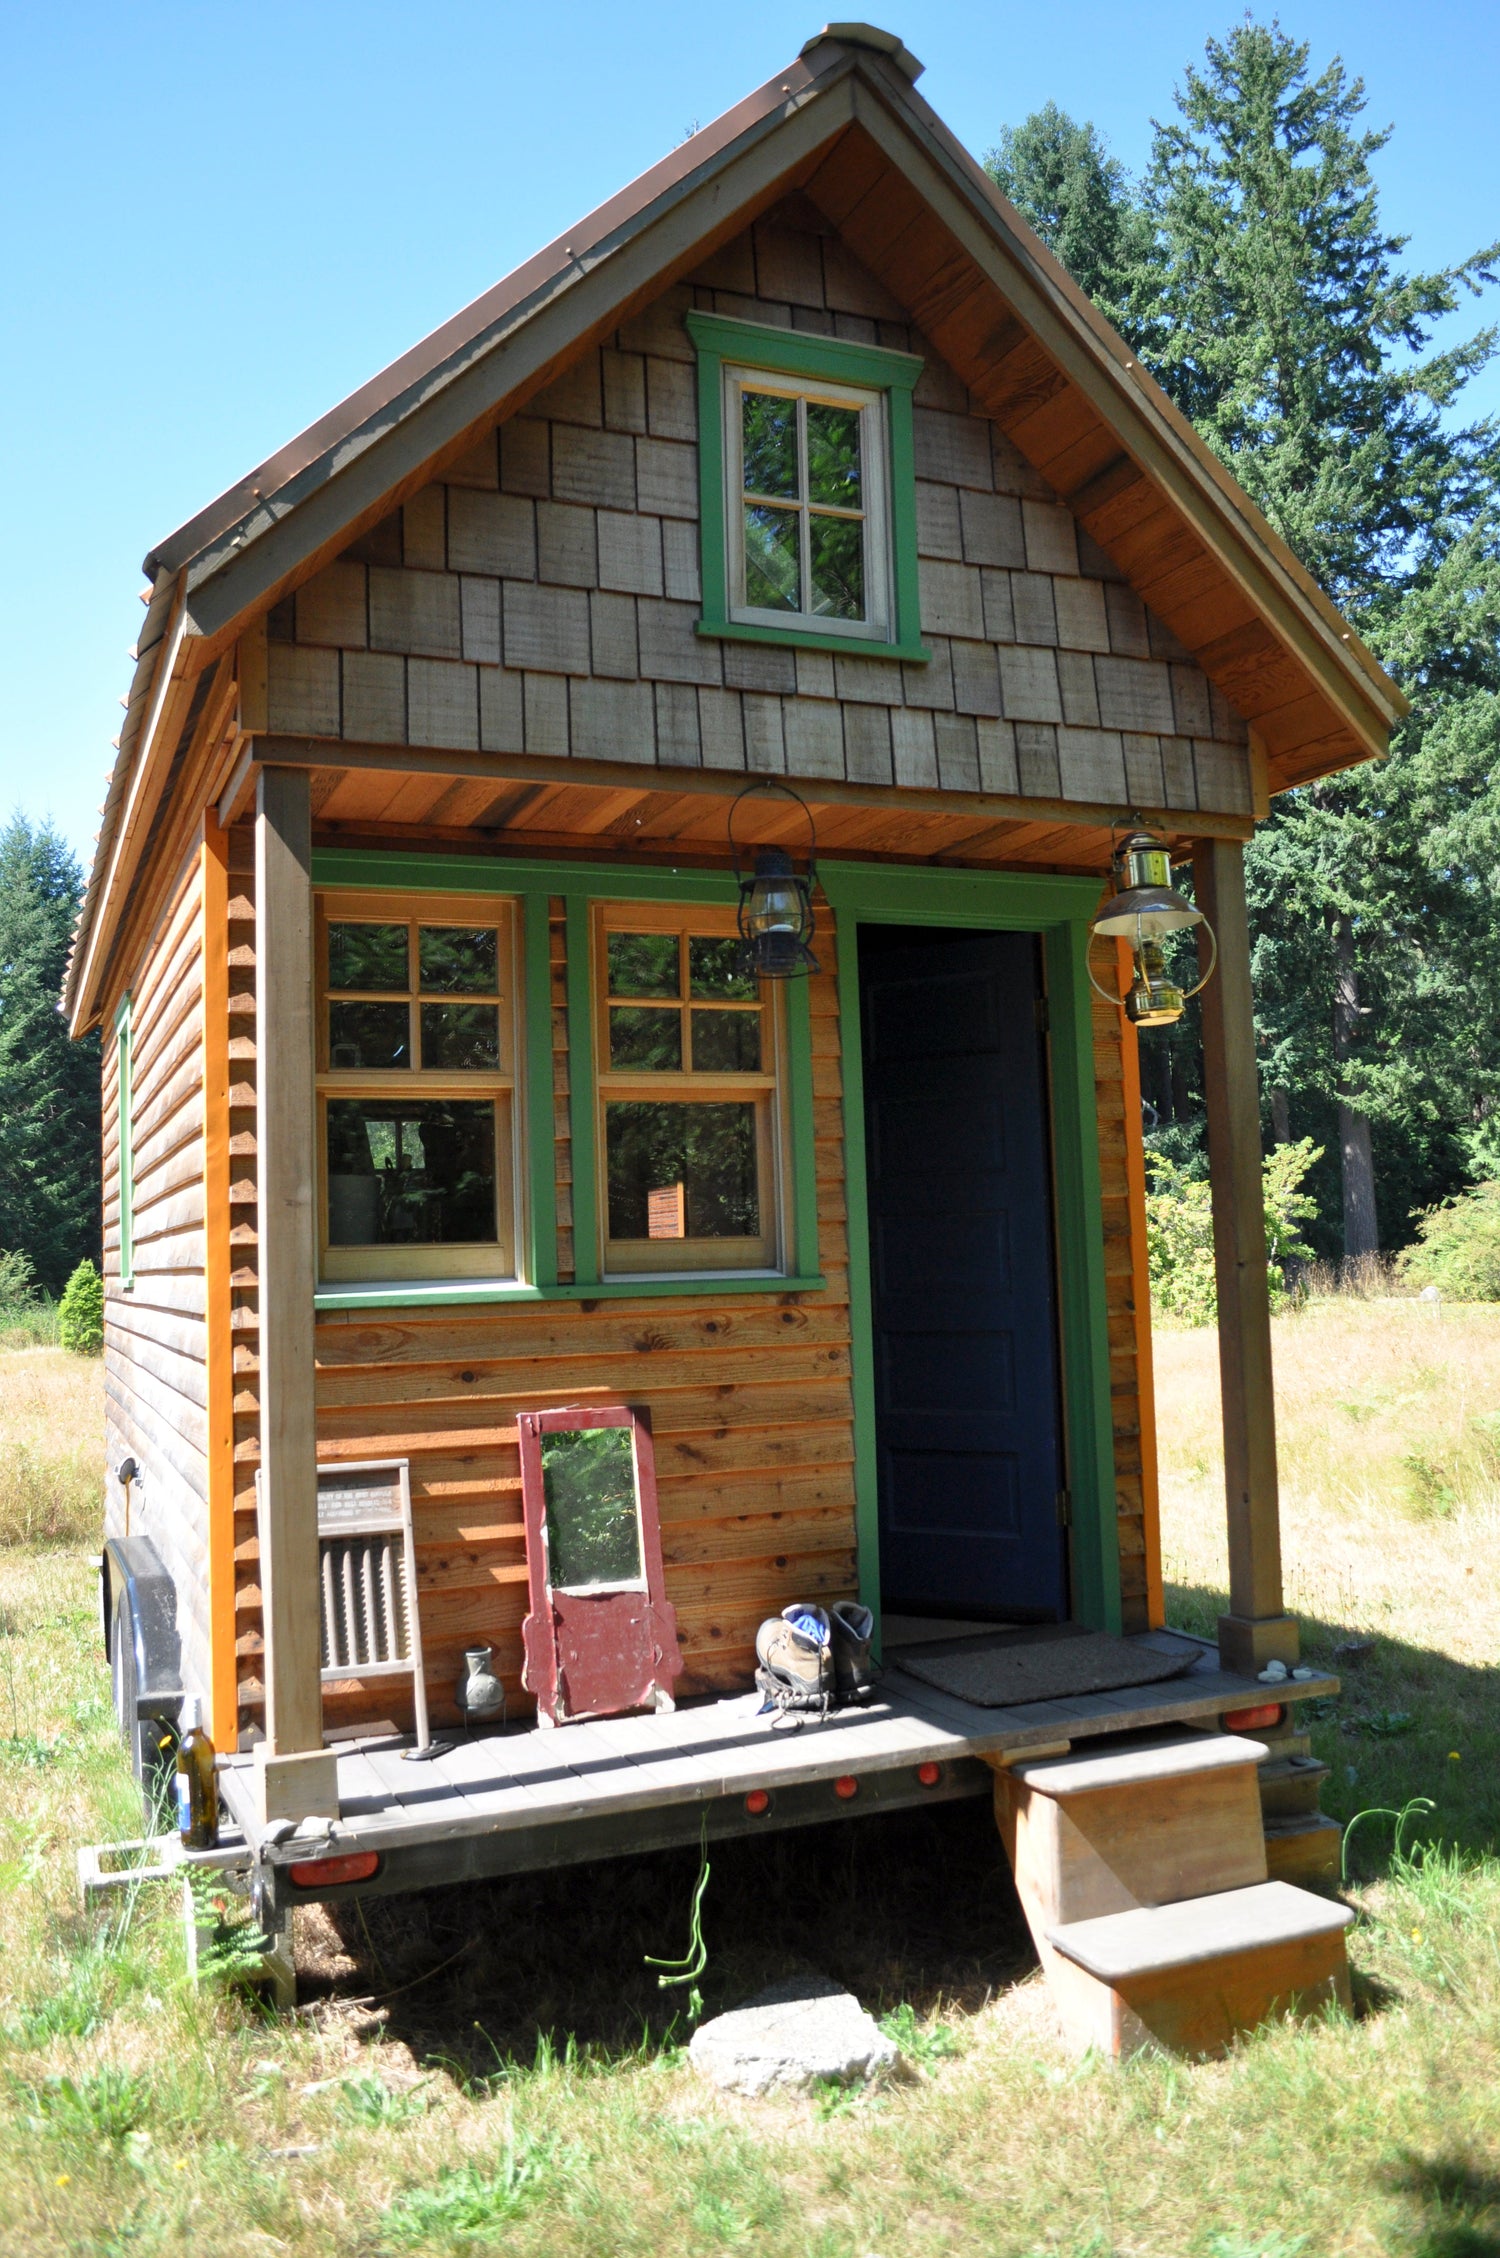 The Beginner's Guide to a Tiny House